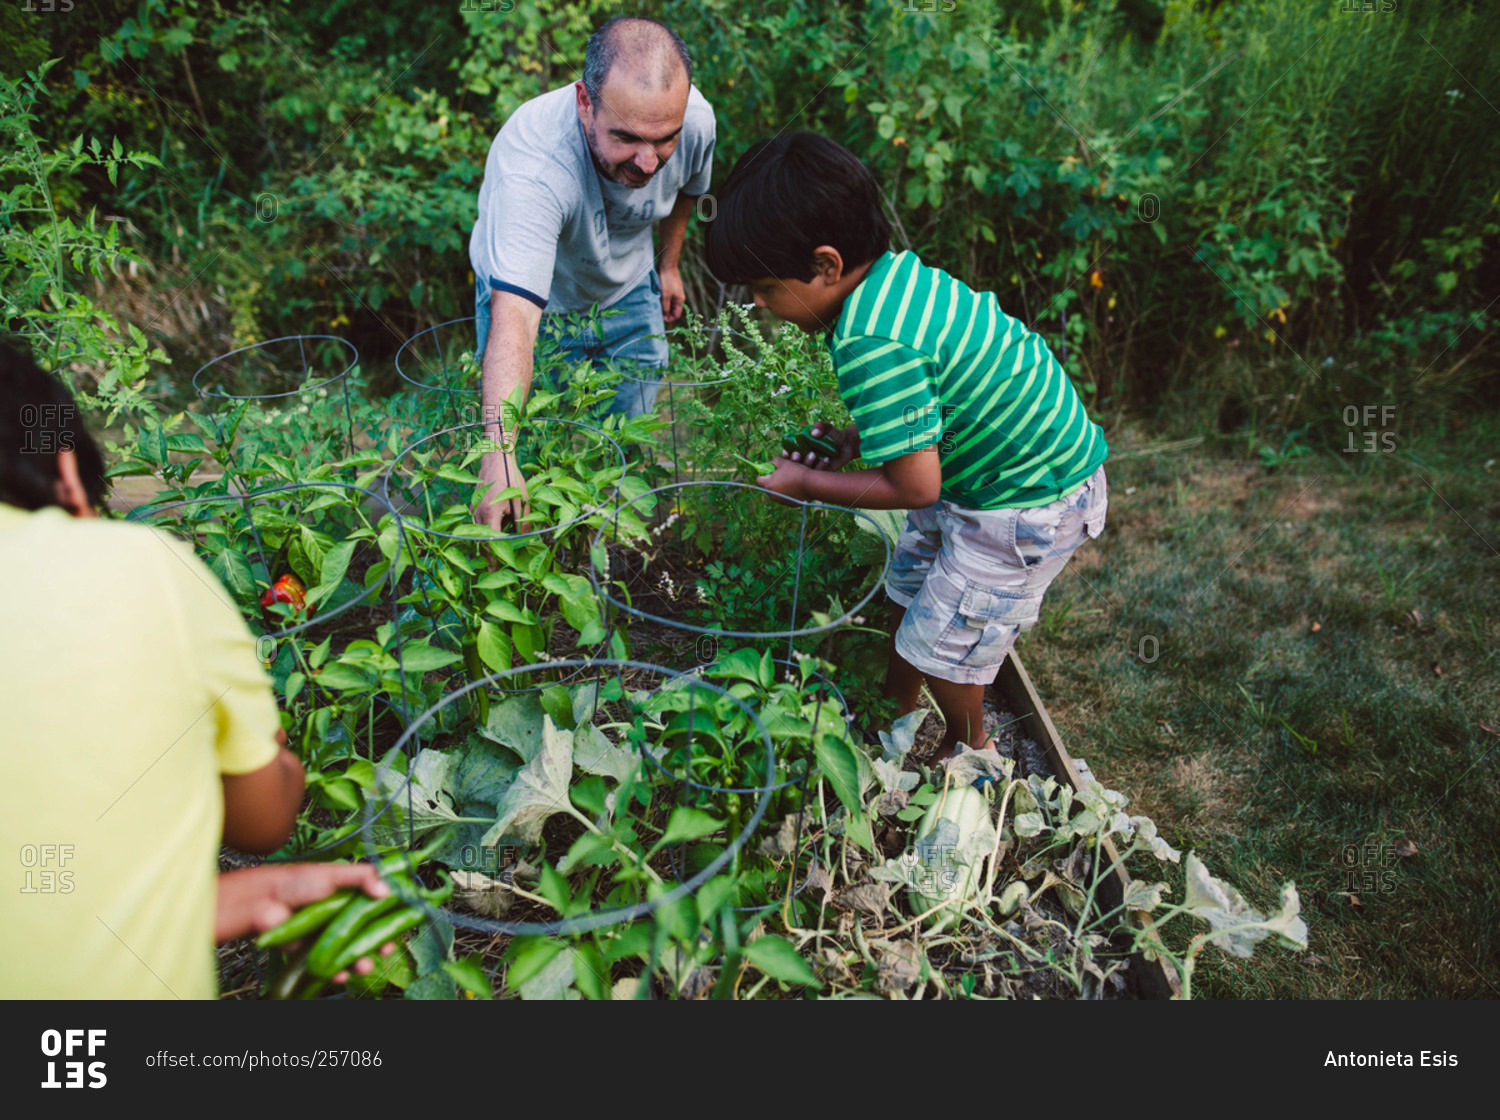 Little boy helping his father pick vegetables from a garden